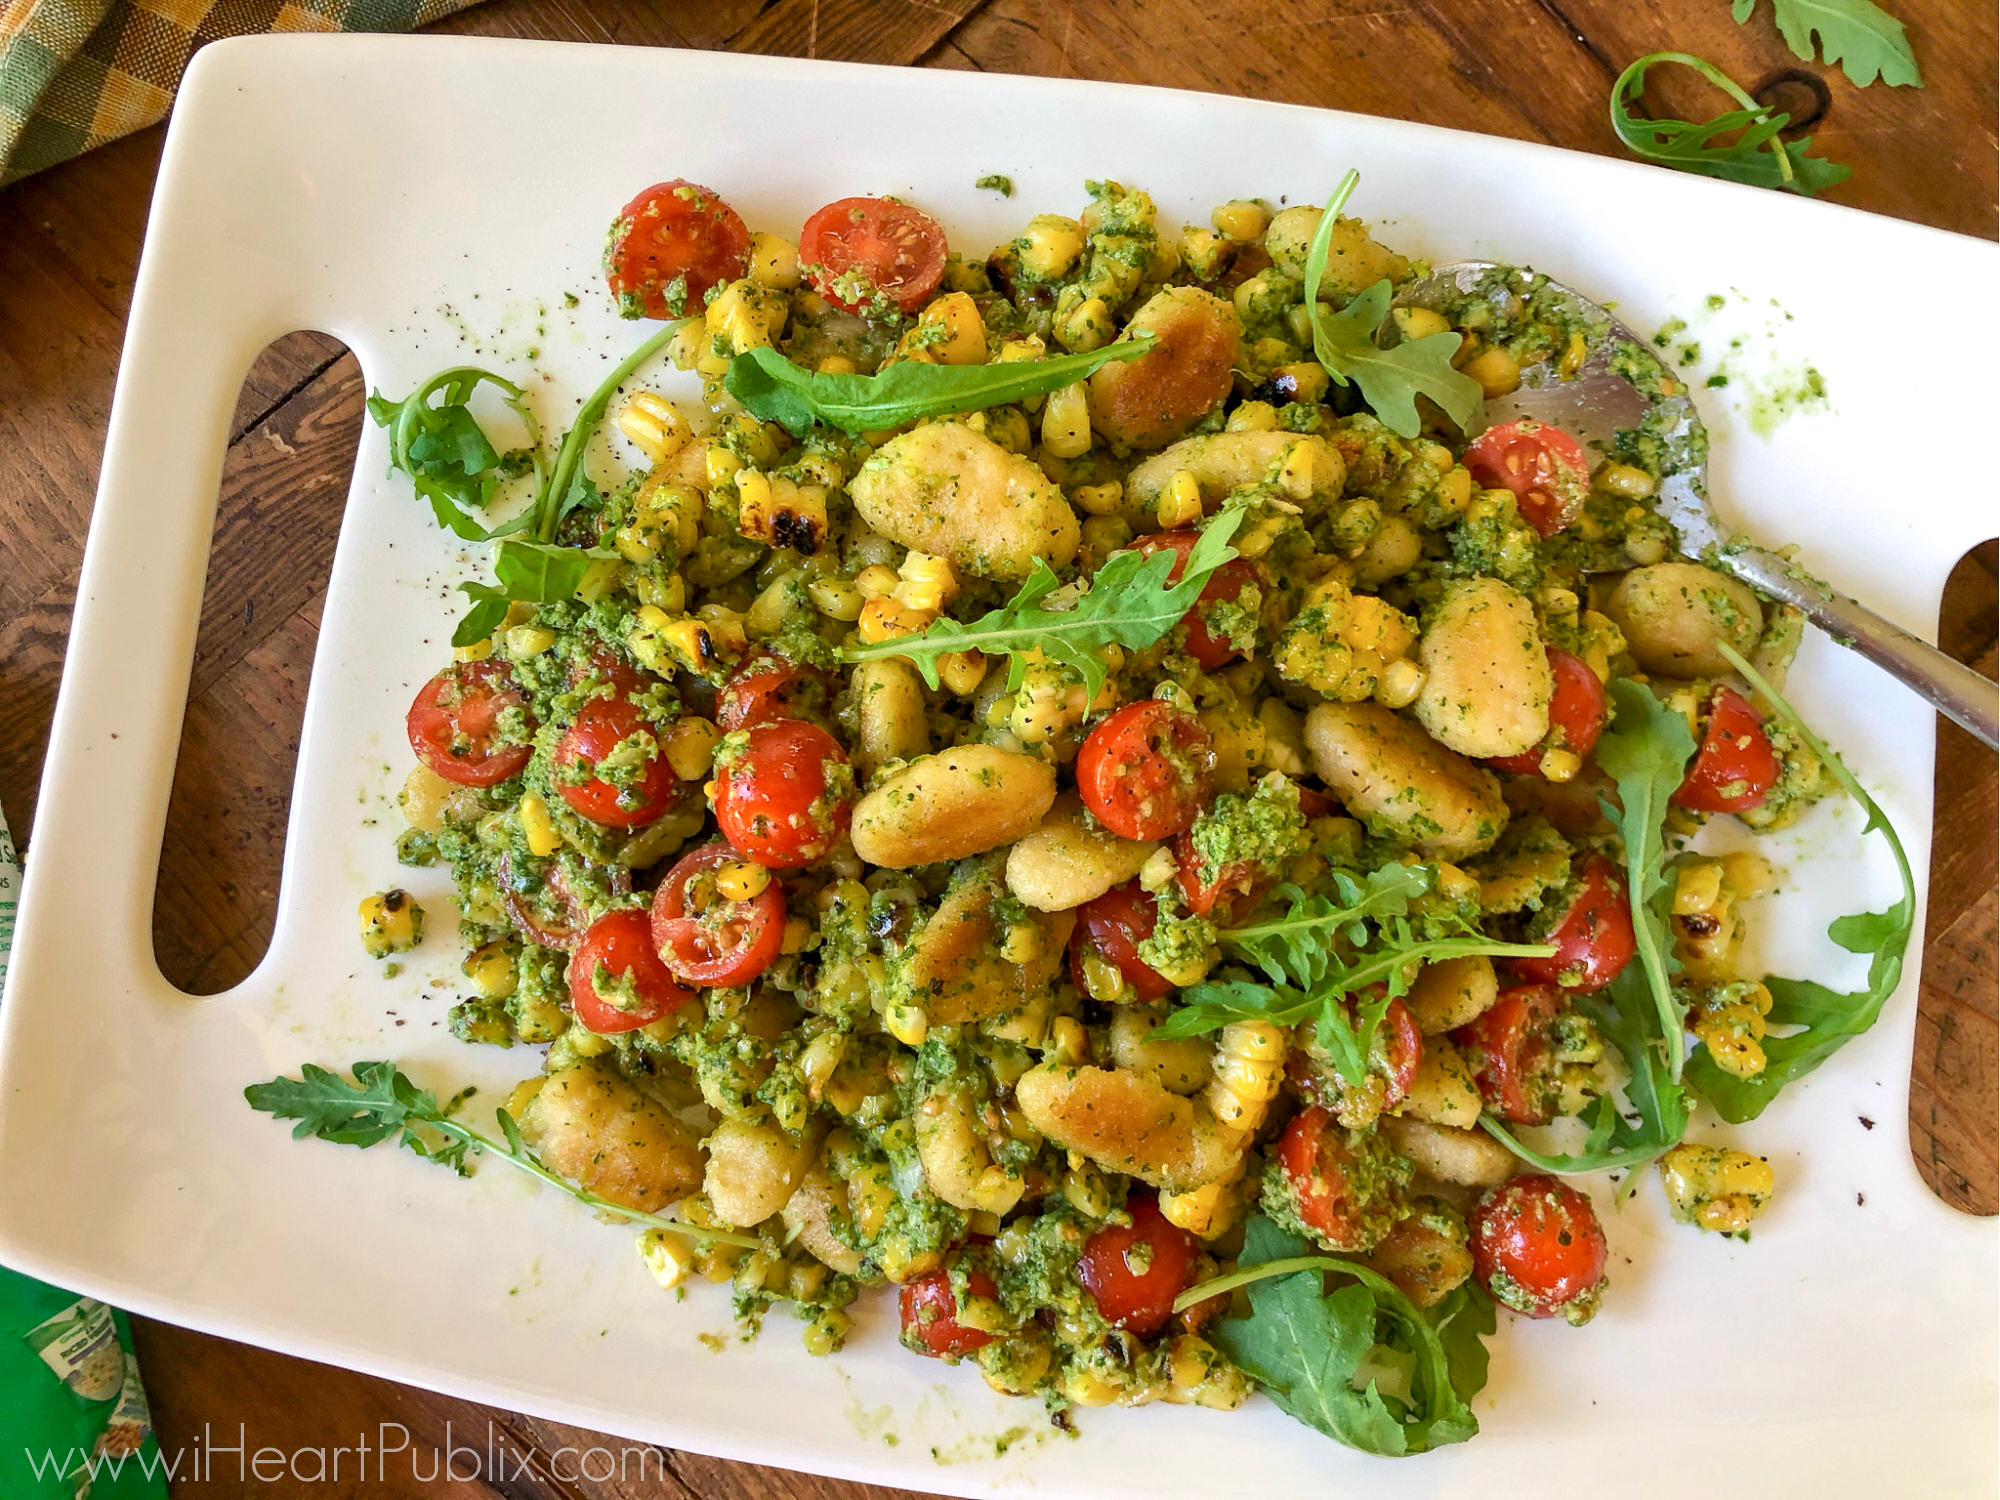 Cauliflower Gnocchi With Arugula Pesto & Sweet Corn - Easy & Delicious Way To Add More Veggies To Your Menu! on I Heart Publix